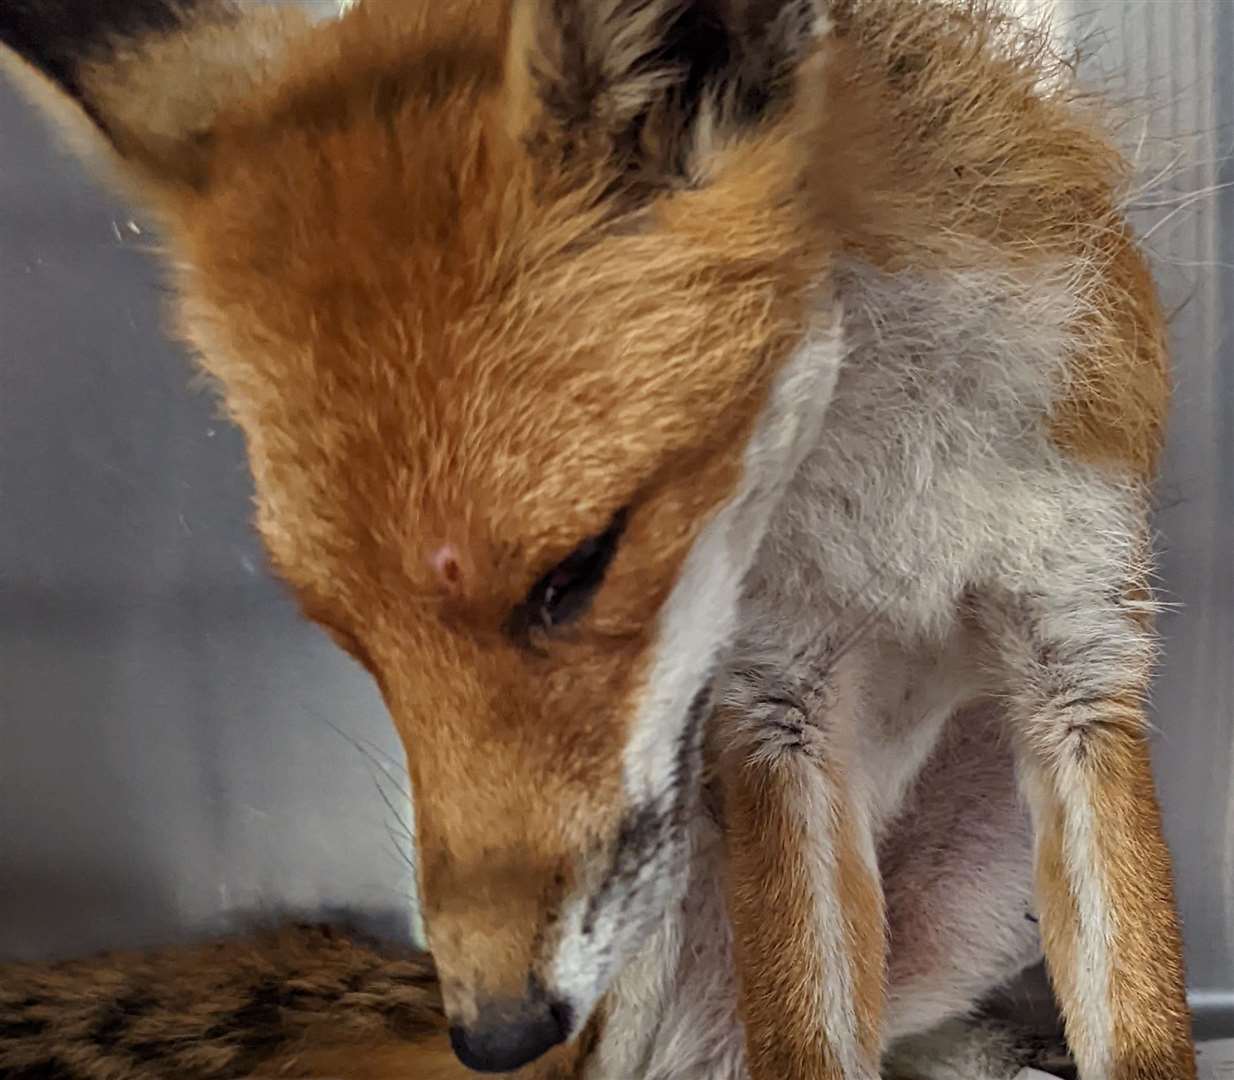 The injured fox was found at Twydall Primary School Photo: RSPCA